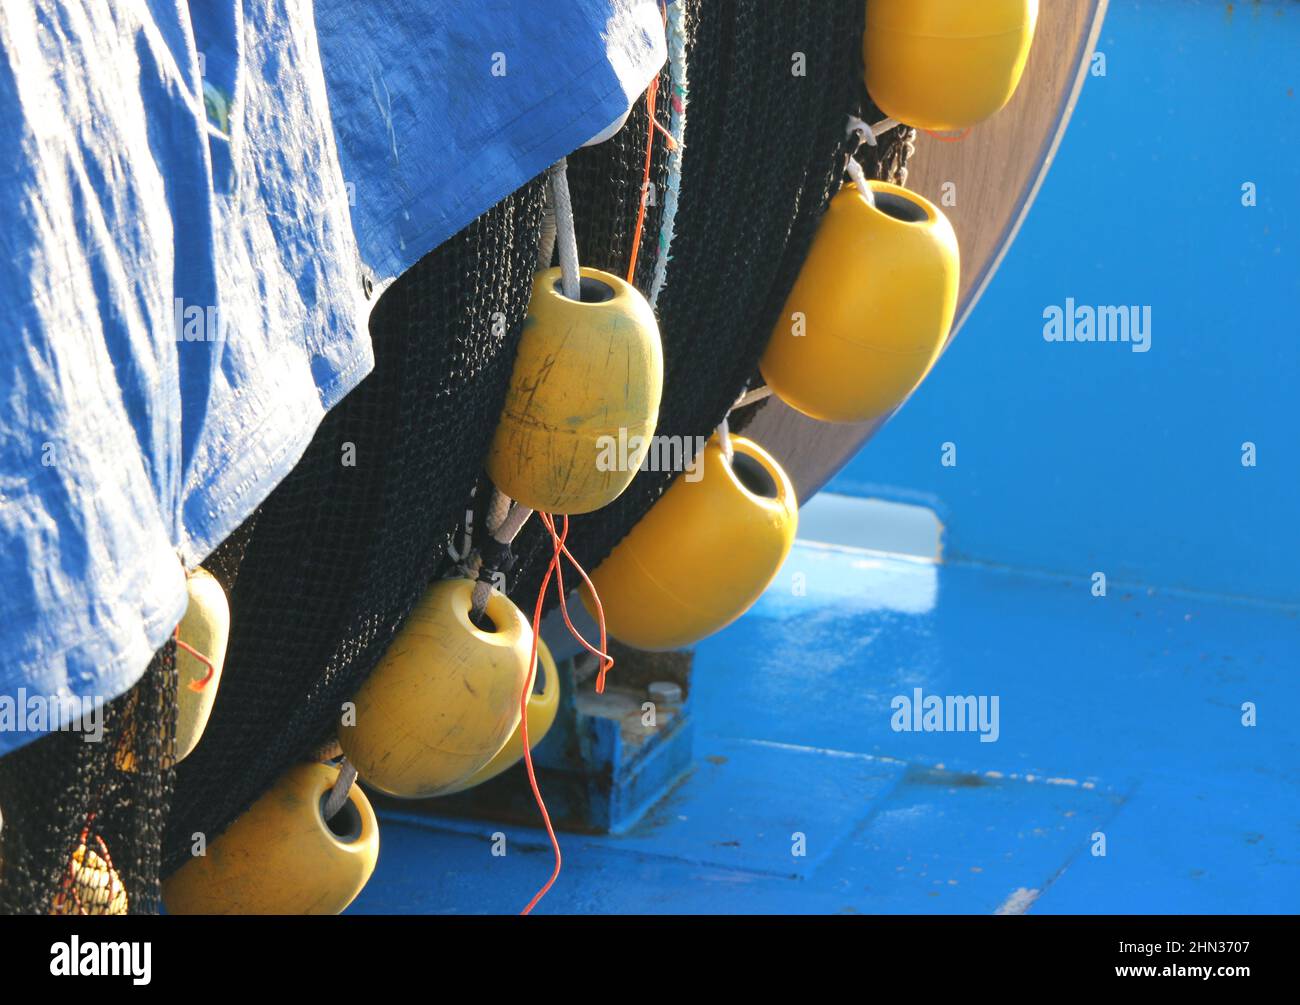 Bright yellow buoys hang from black netting against a background of shiny blue metal. Stock Photo